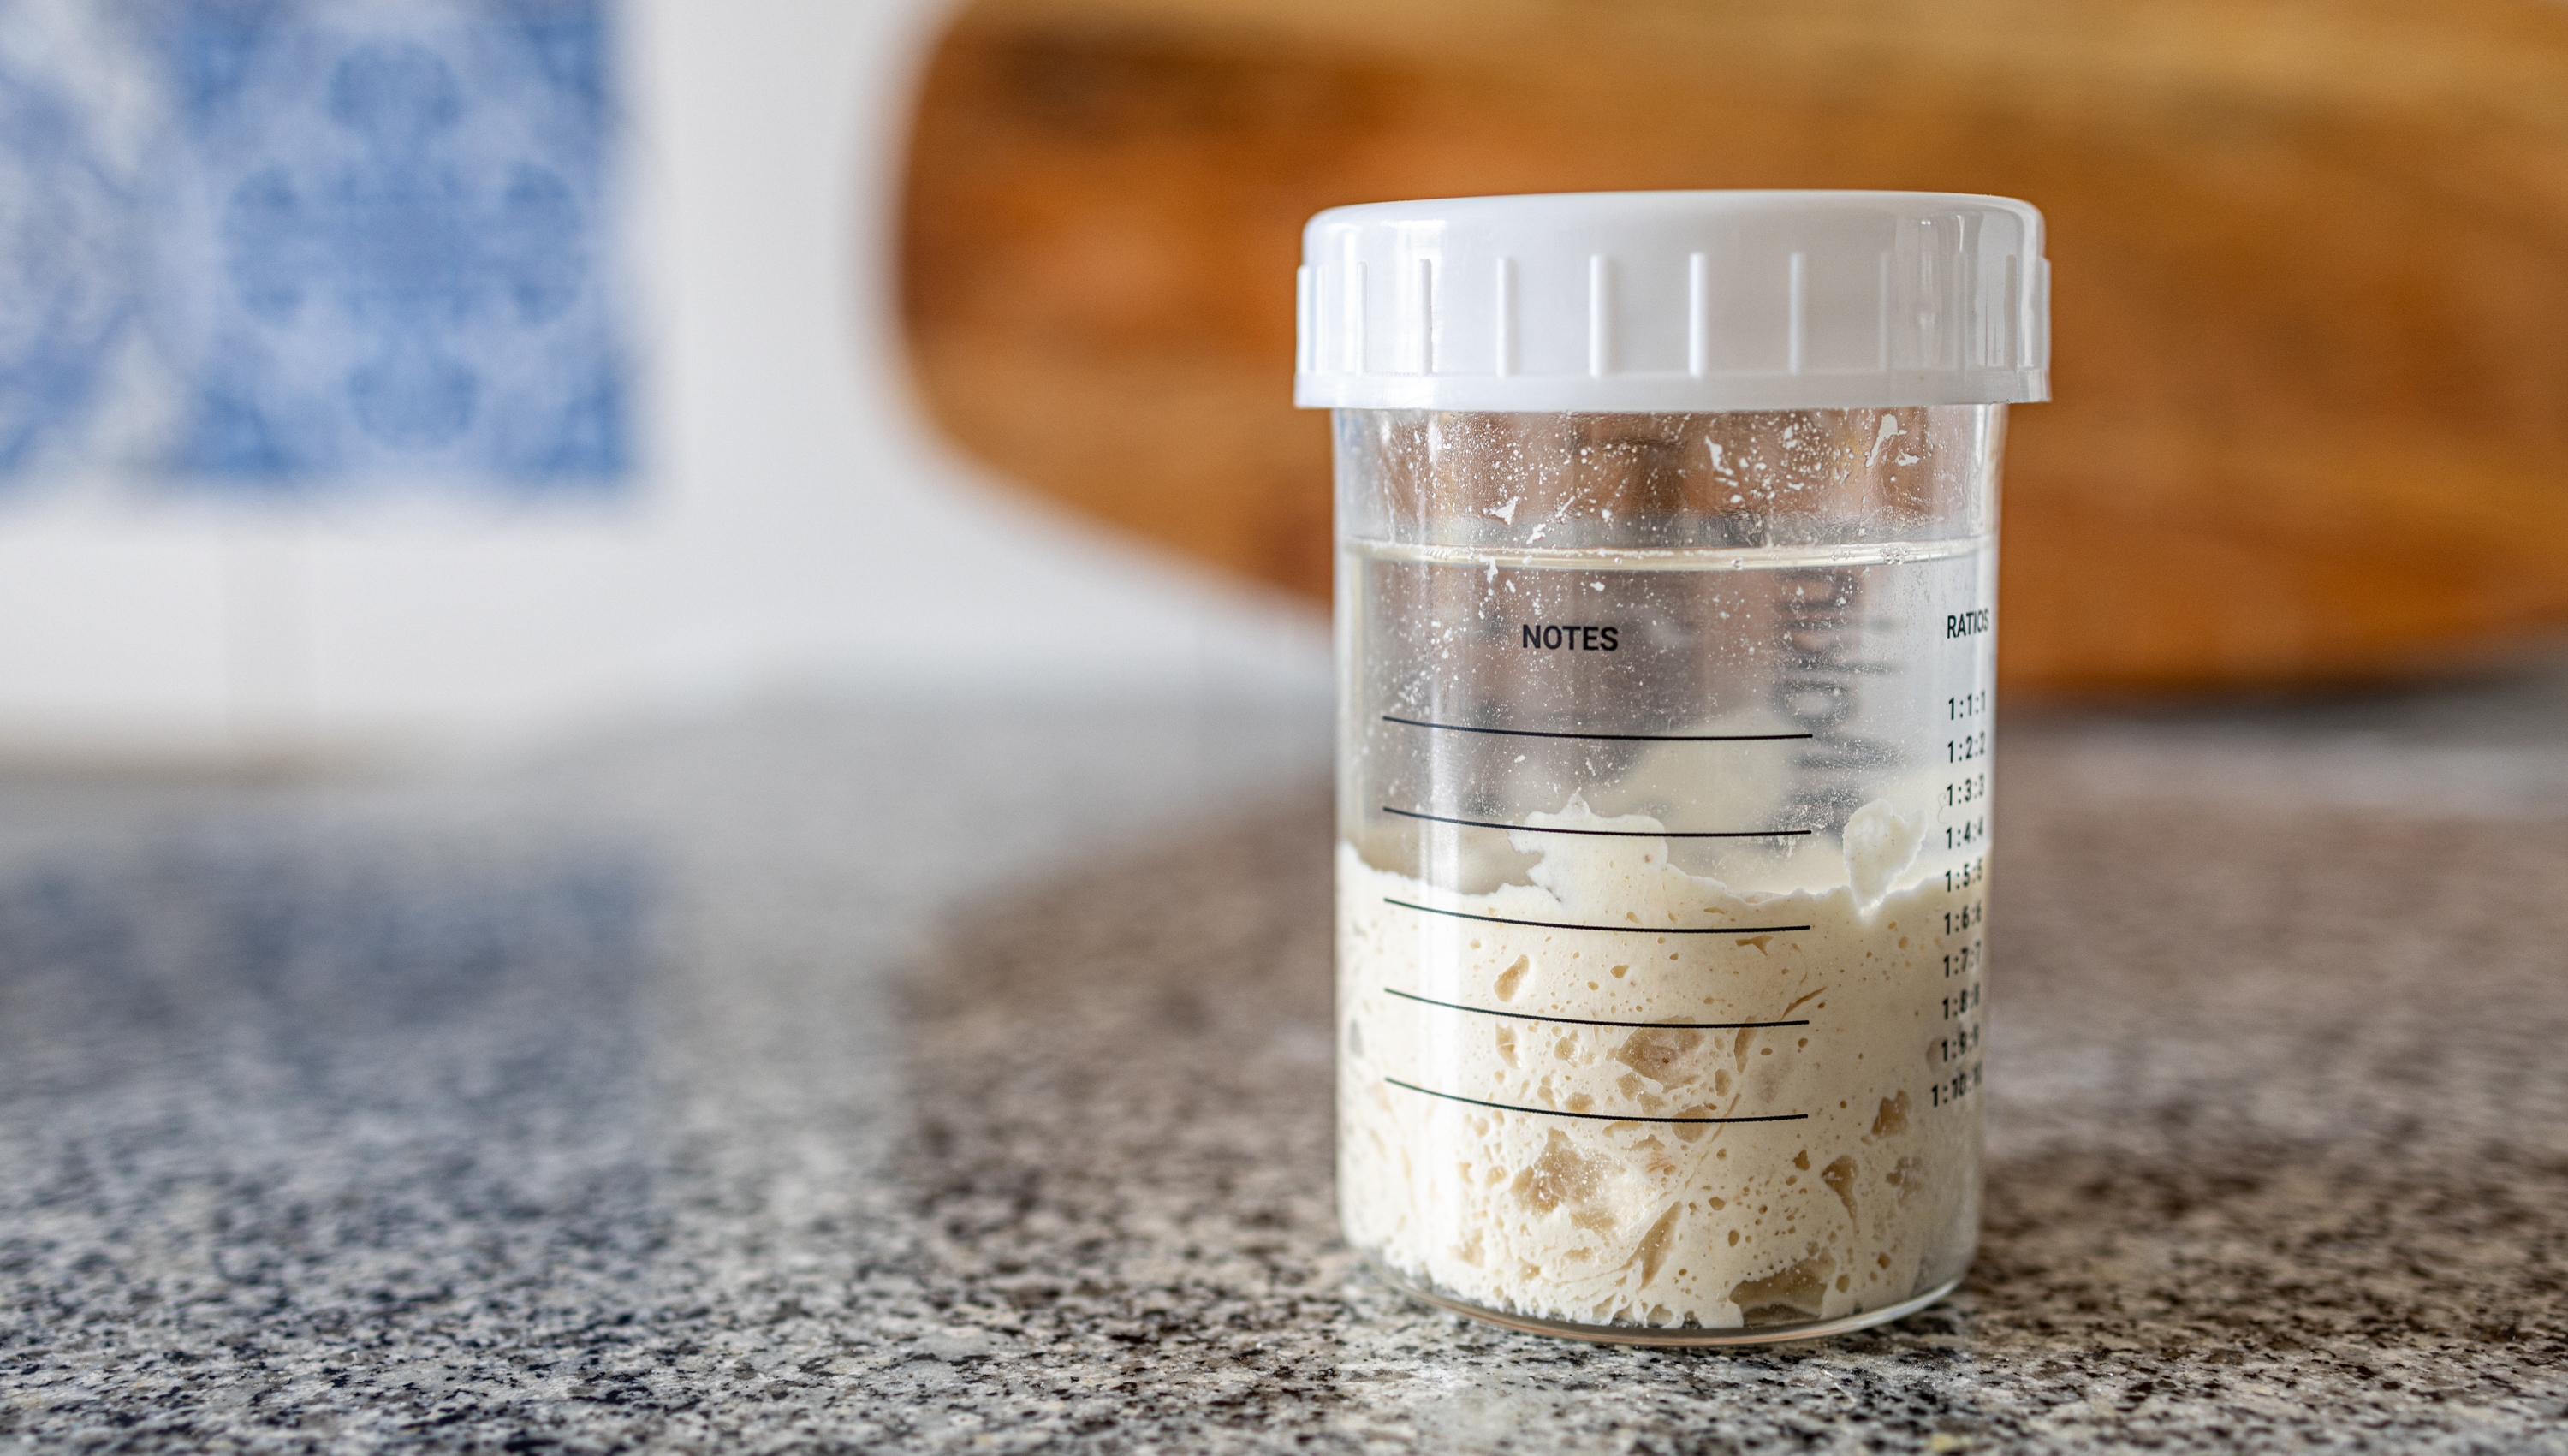 A sourdough starter covered with liquid